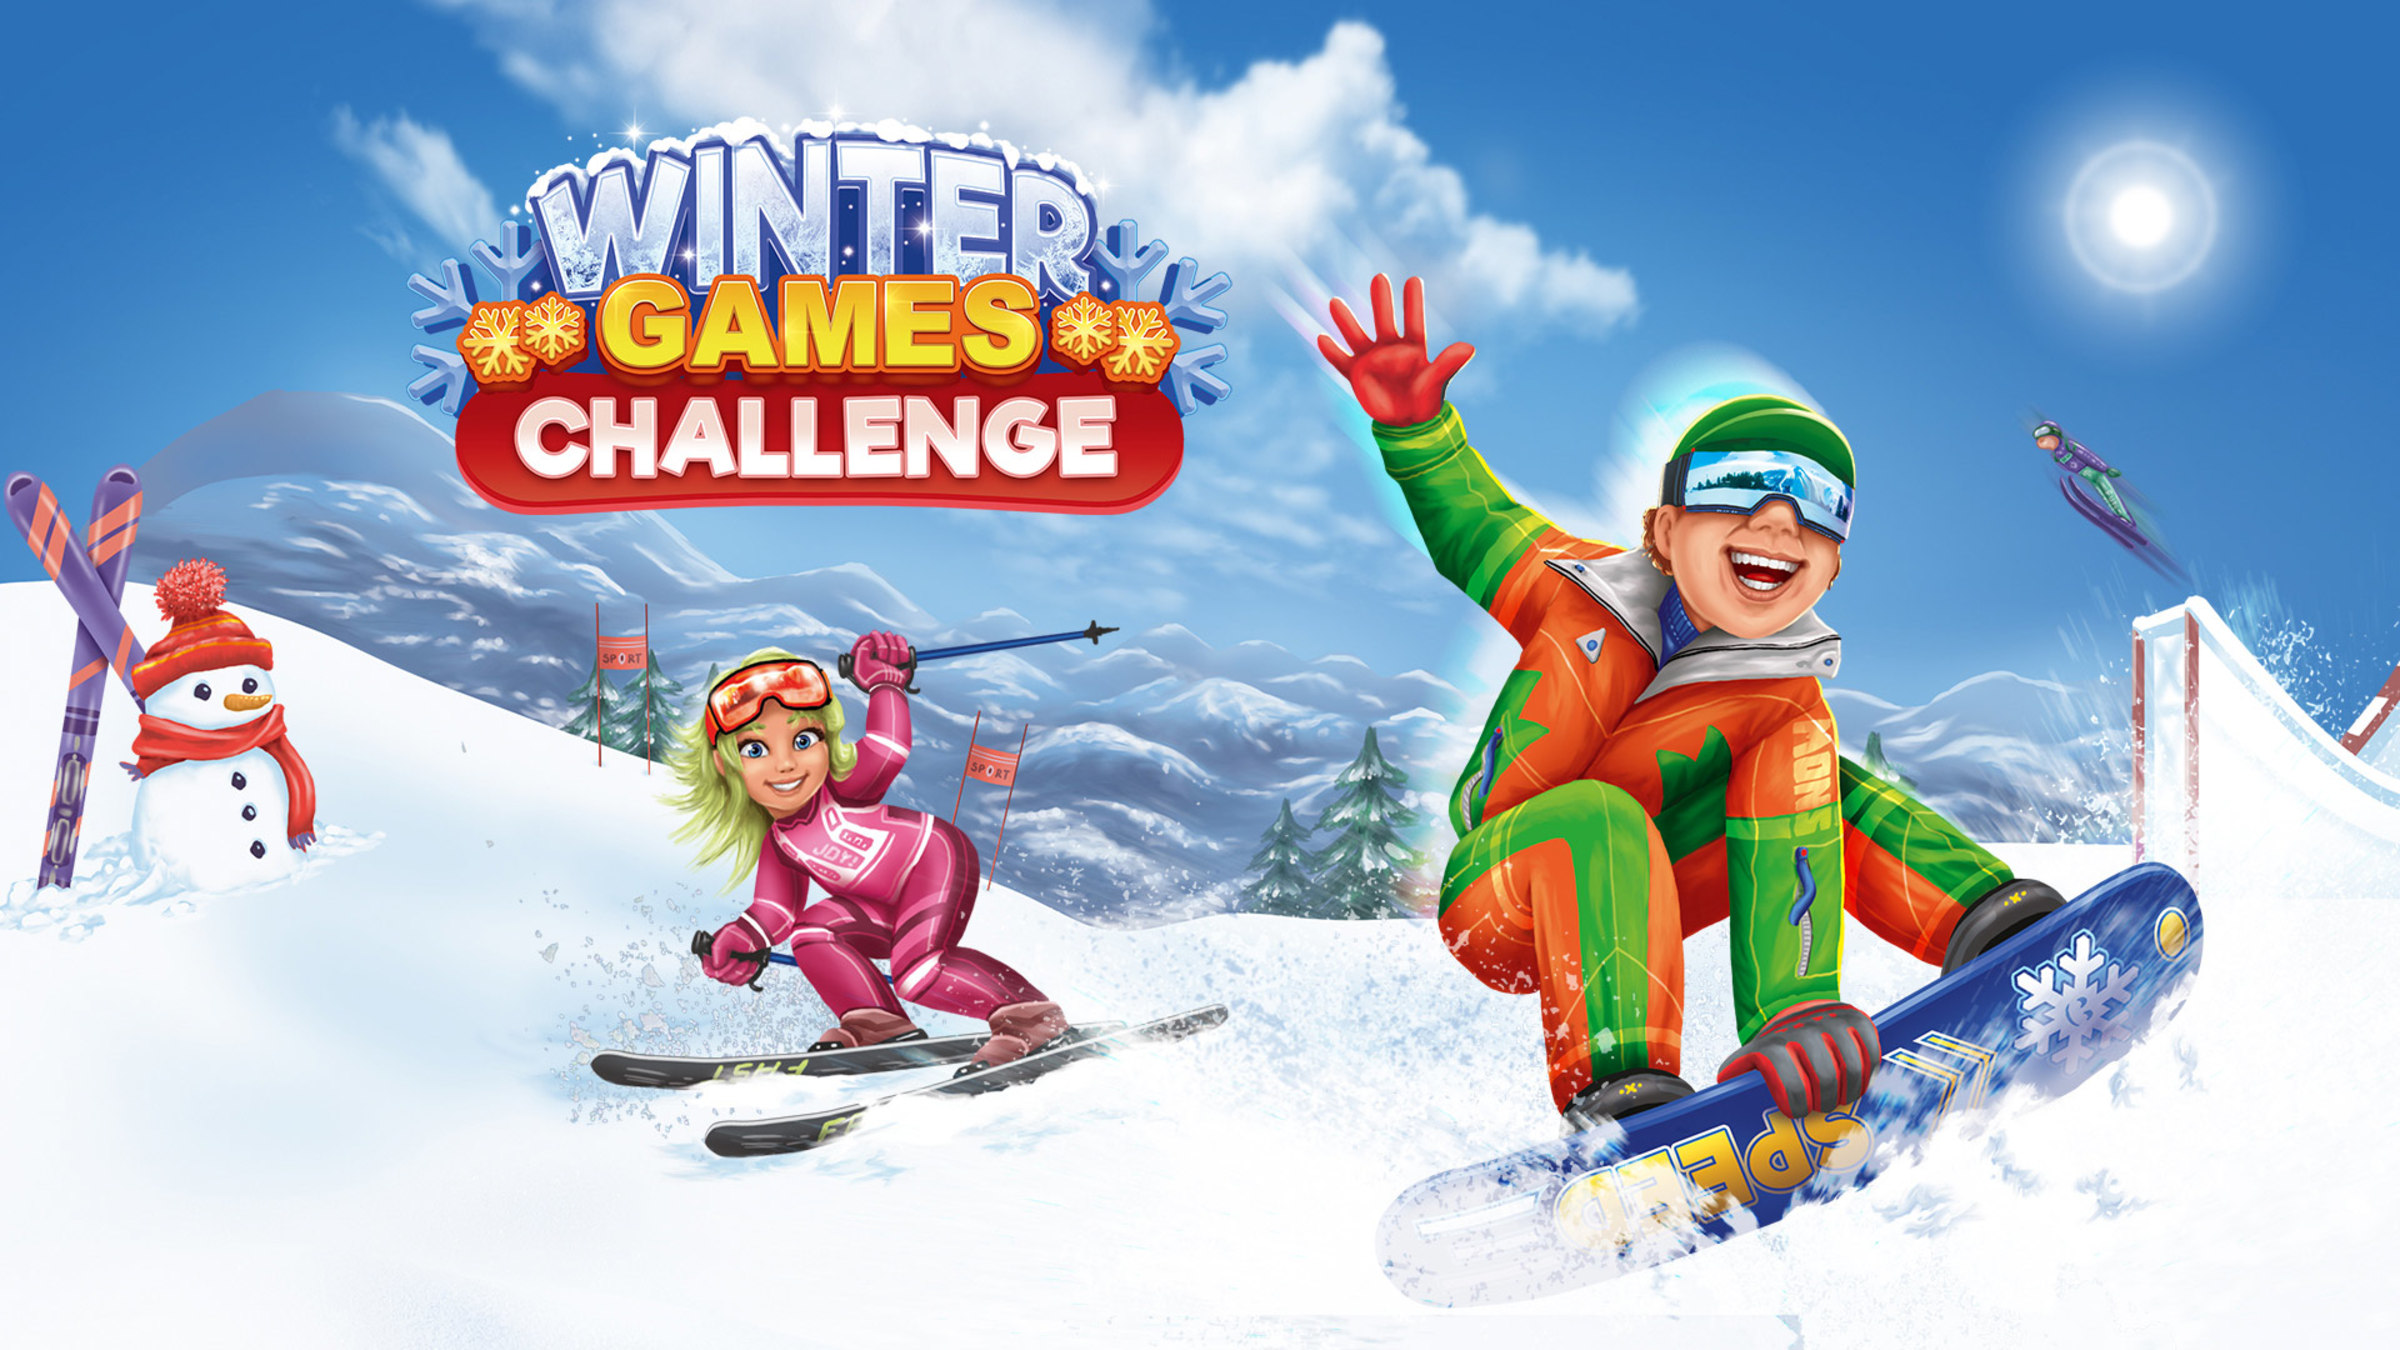 Winter Games Challenge for Site - Nintendo Nintendo Switch Official